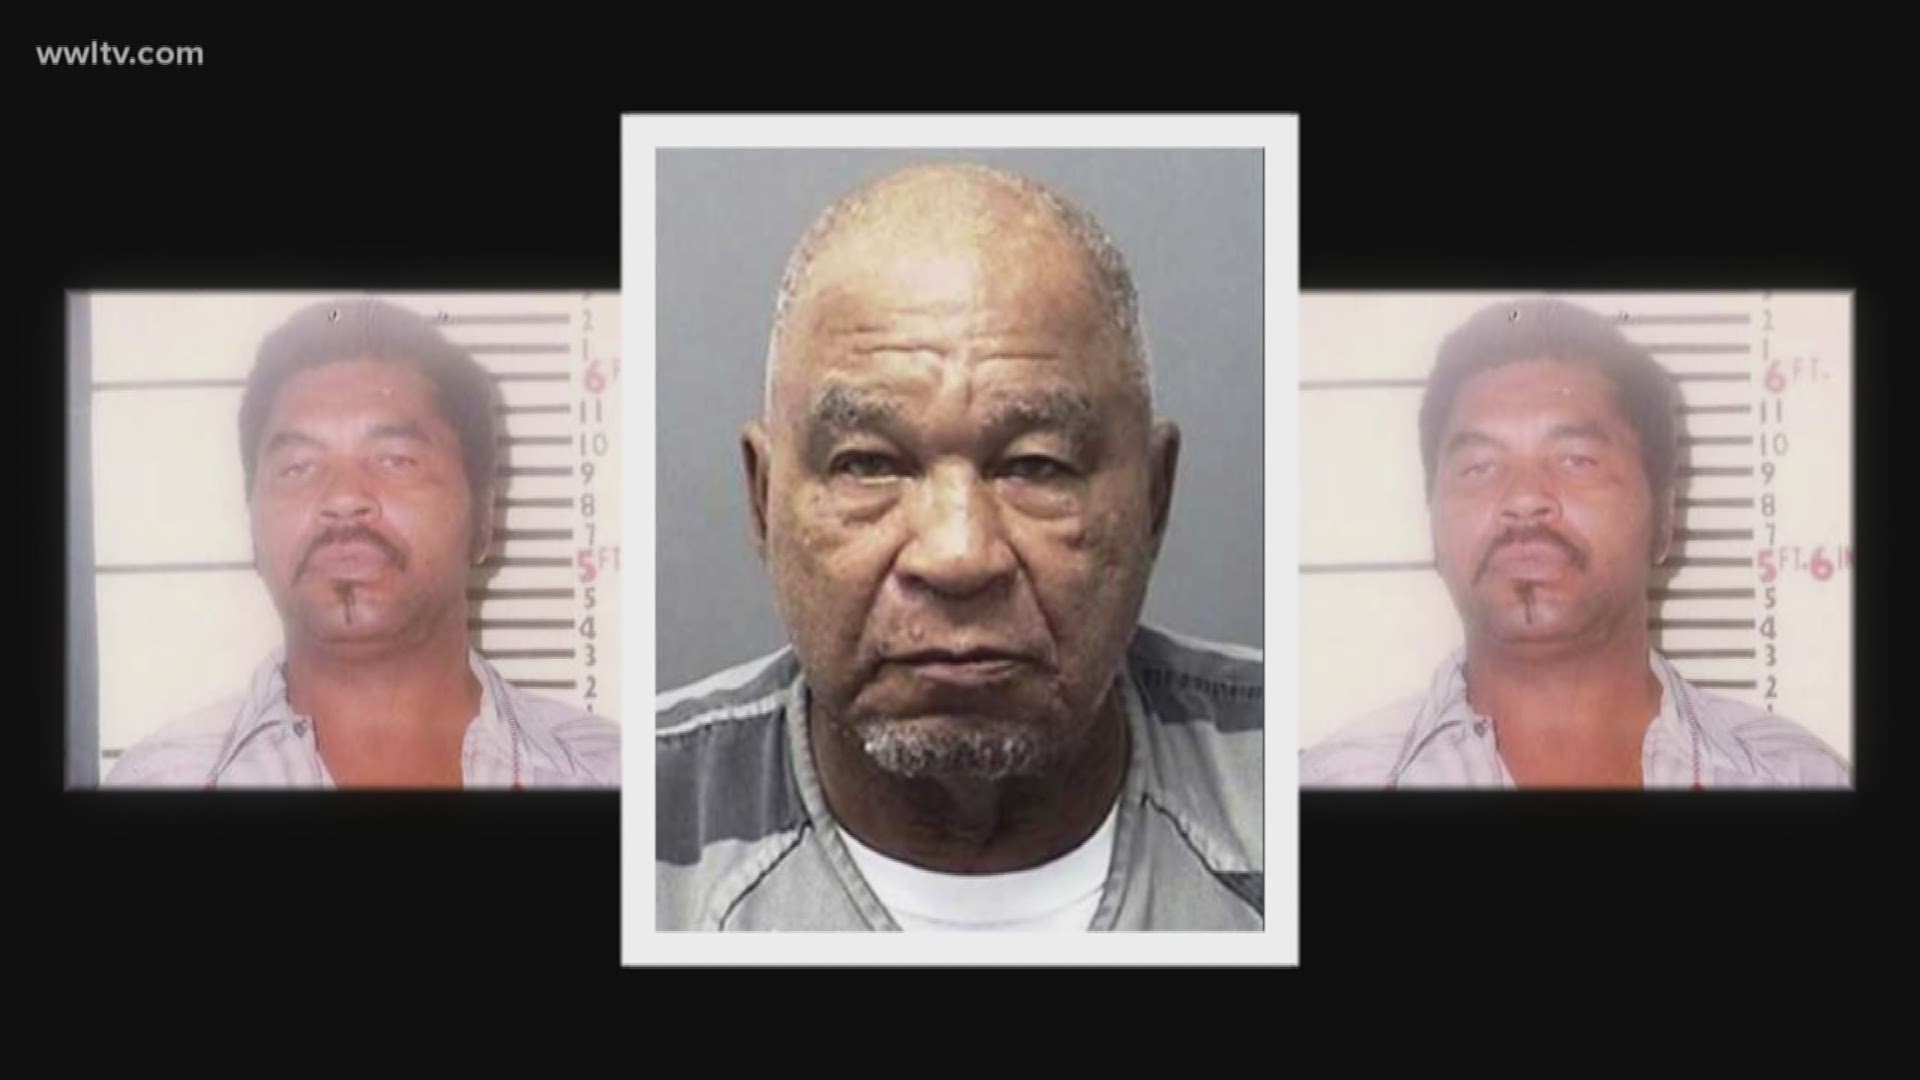 Samuel Little allegedly confessed to two murders in Louisiana and could be responsible for more than 90 murders across the country.